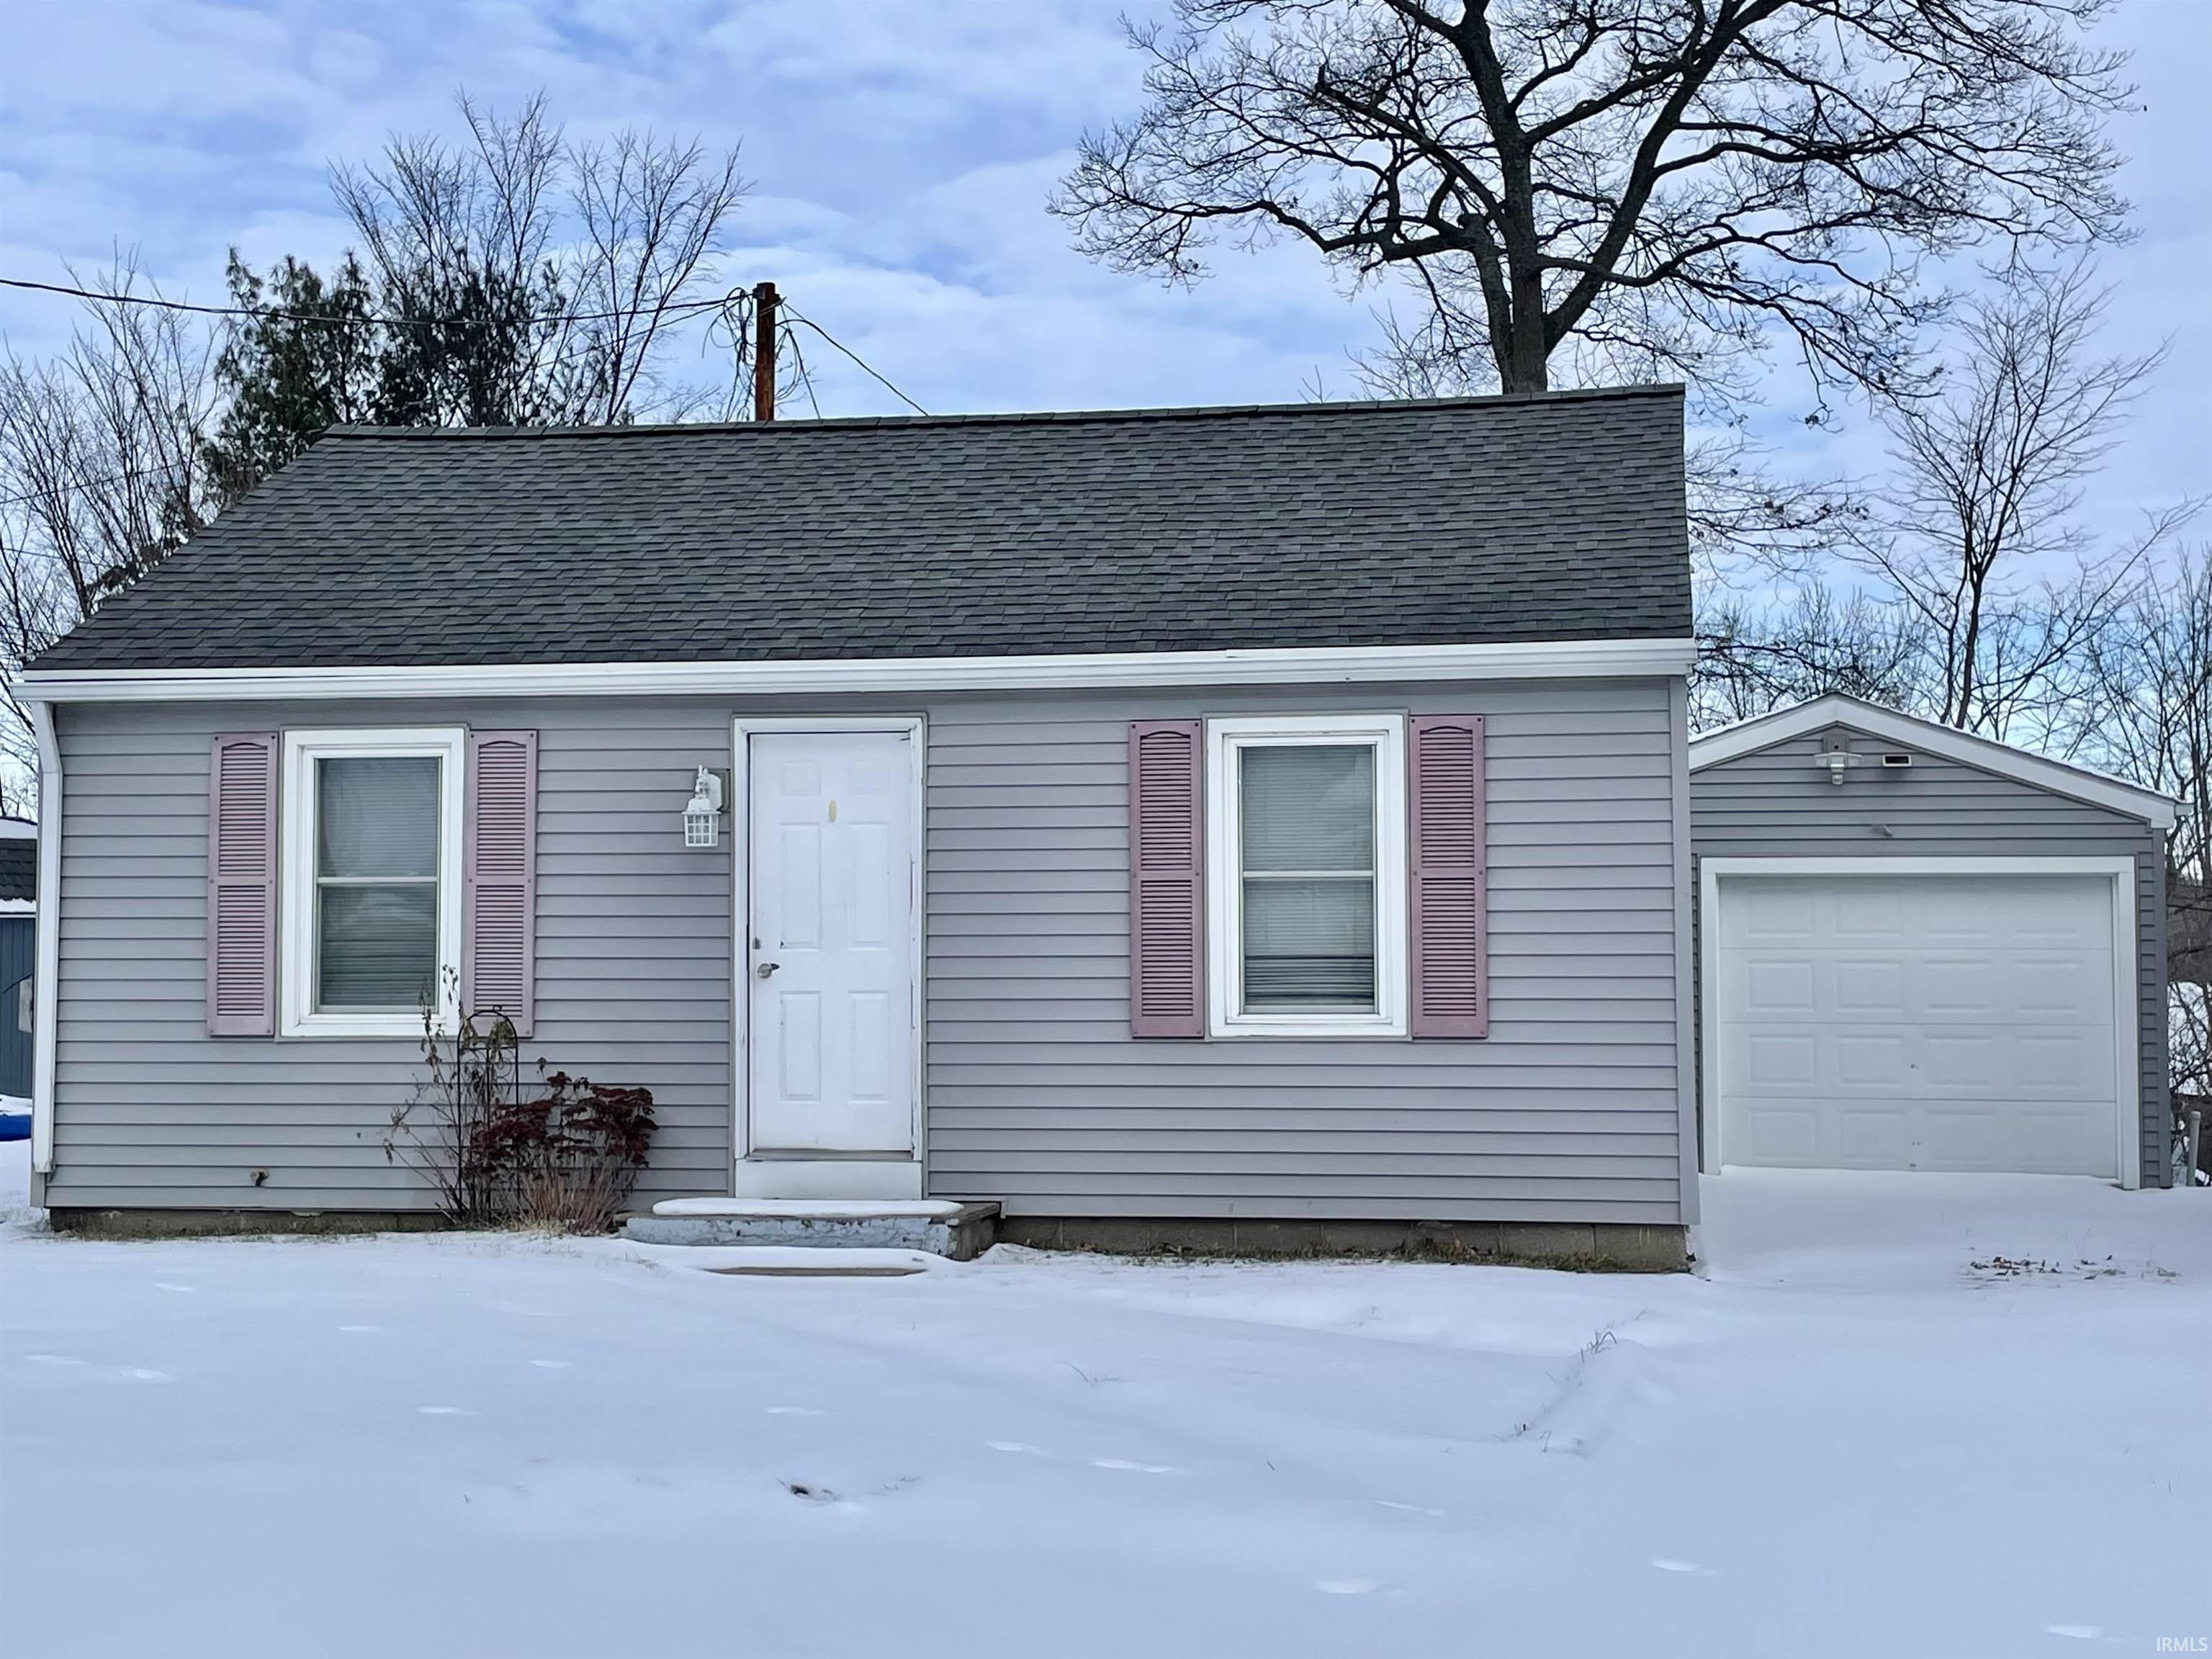 ** OPEN HOUSE SUNDAY 1/30 1PM-3PM ** Lake season is coming and this cozy cottage is waiting for its new owner! Let's face it, lake life is the best life, and this has all the great amenities without the high cost. The home has a lake view with deeded pier access, a nice porch to watch the water, and an extended 1 car attached garage that could easily fit a small workshop or even a long boat! The seller plans to leave 10 Foot of the current pier. The house just had a new tub installed and the house has been well kept for future owners. If you ever felt ambitious, you will find wood floors under the carpet in the living room. Do not miss out on your chance to call this place home by setting up a showing today!